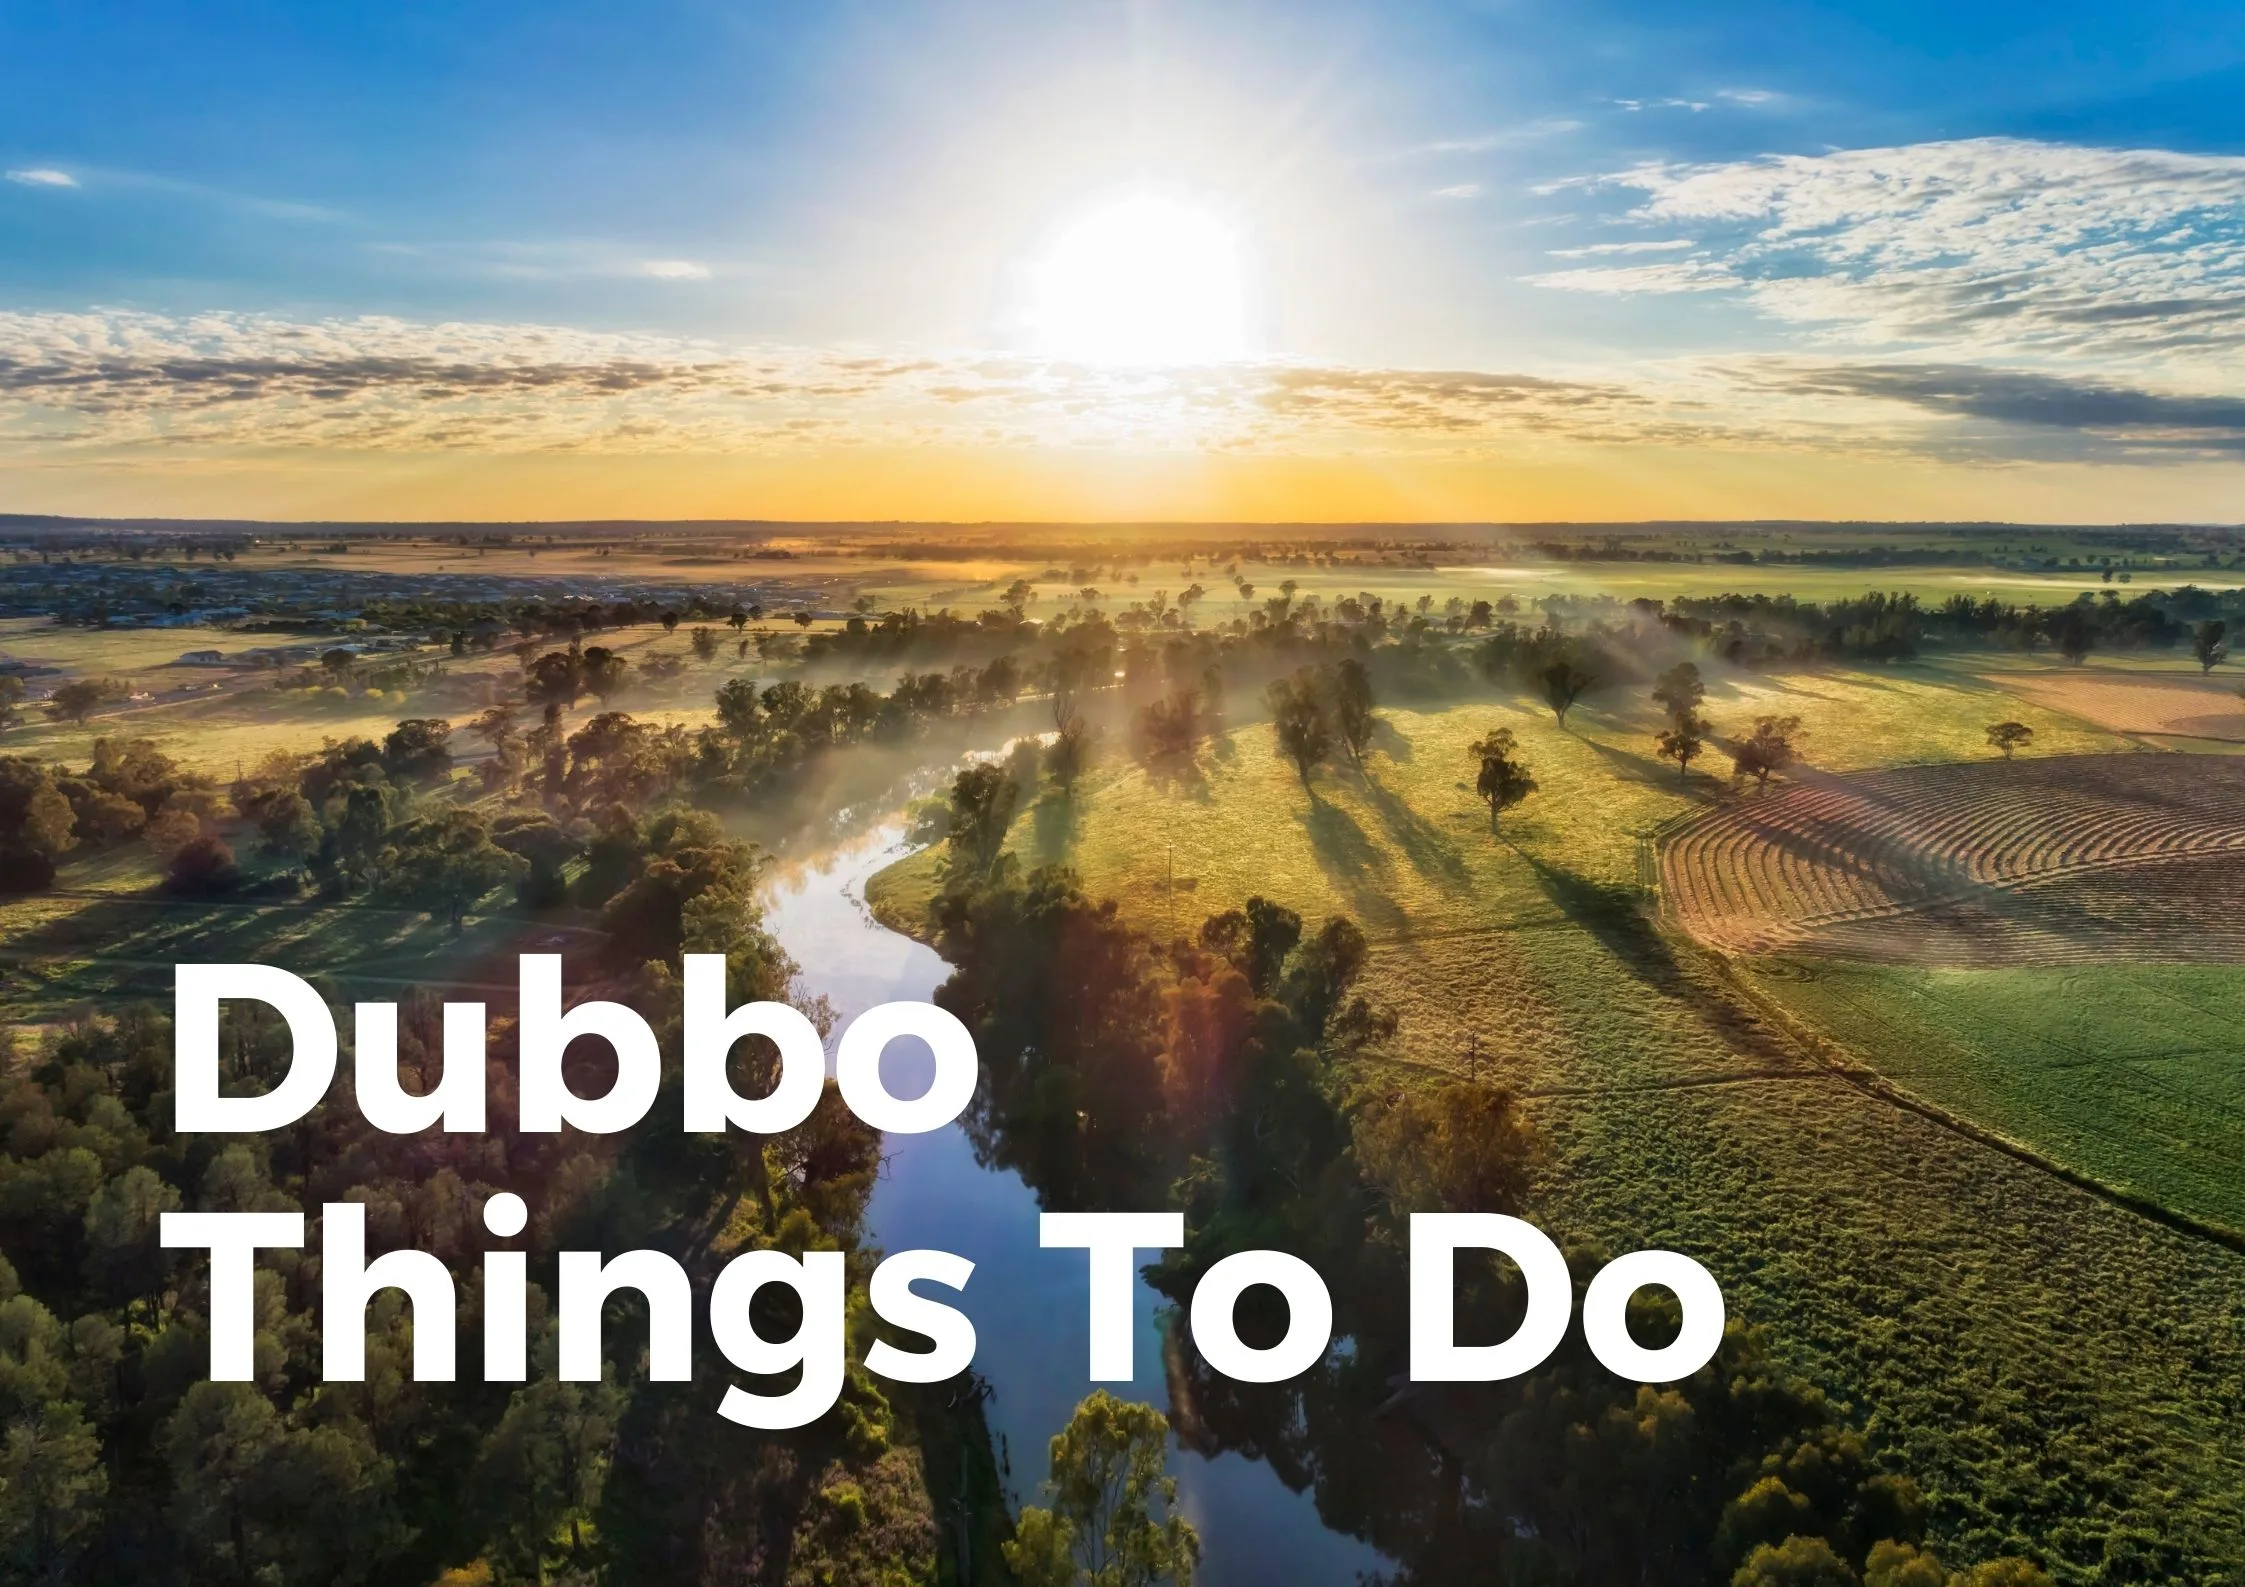 Things to do in Dubbo